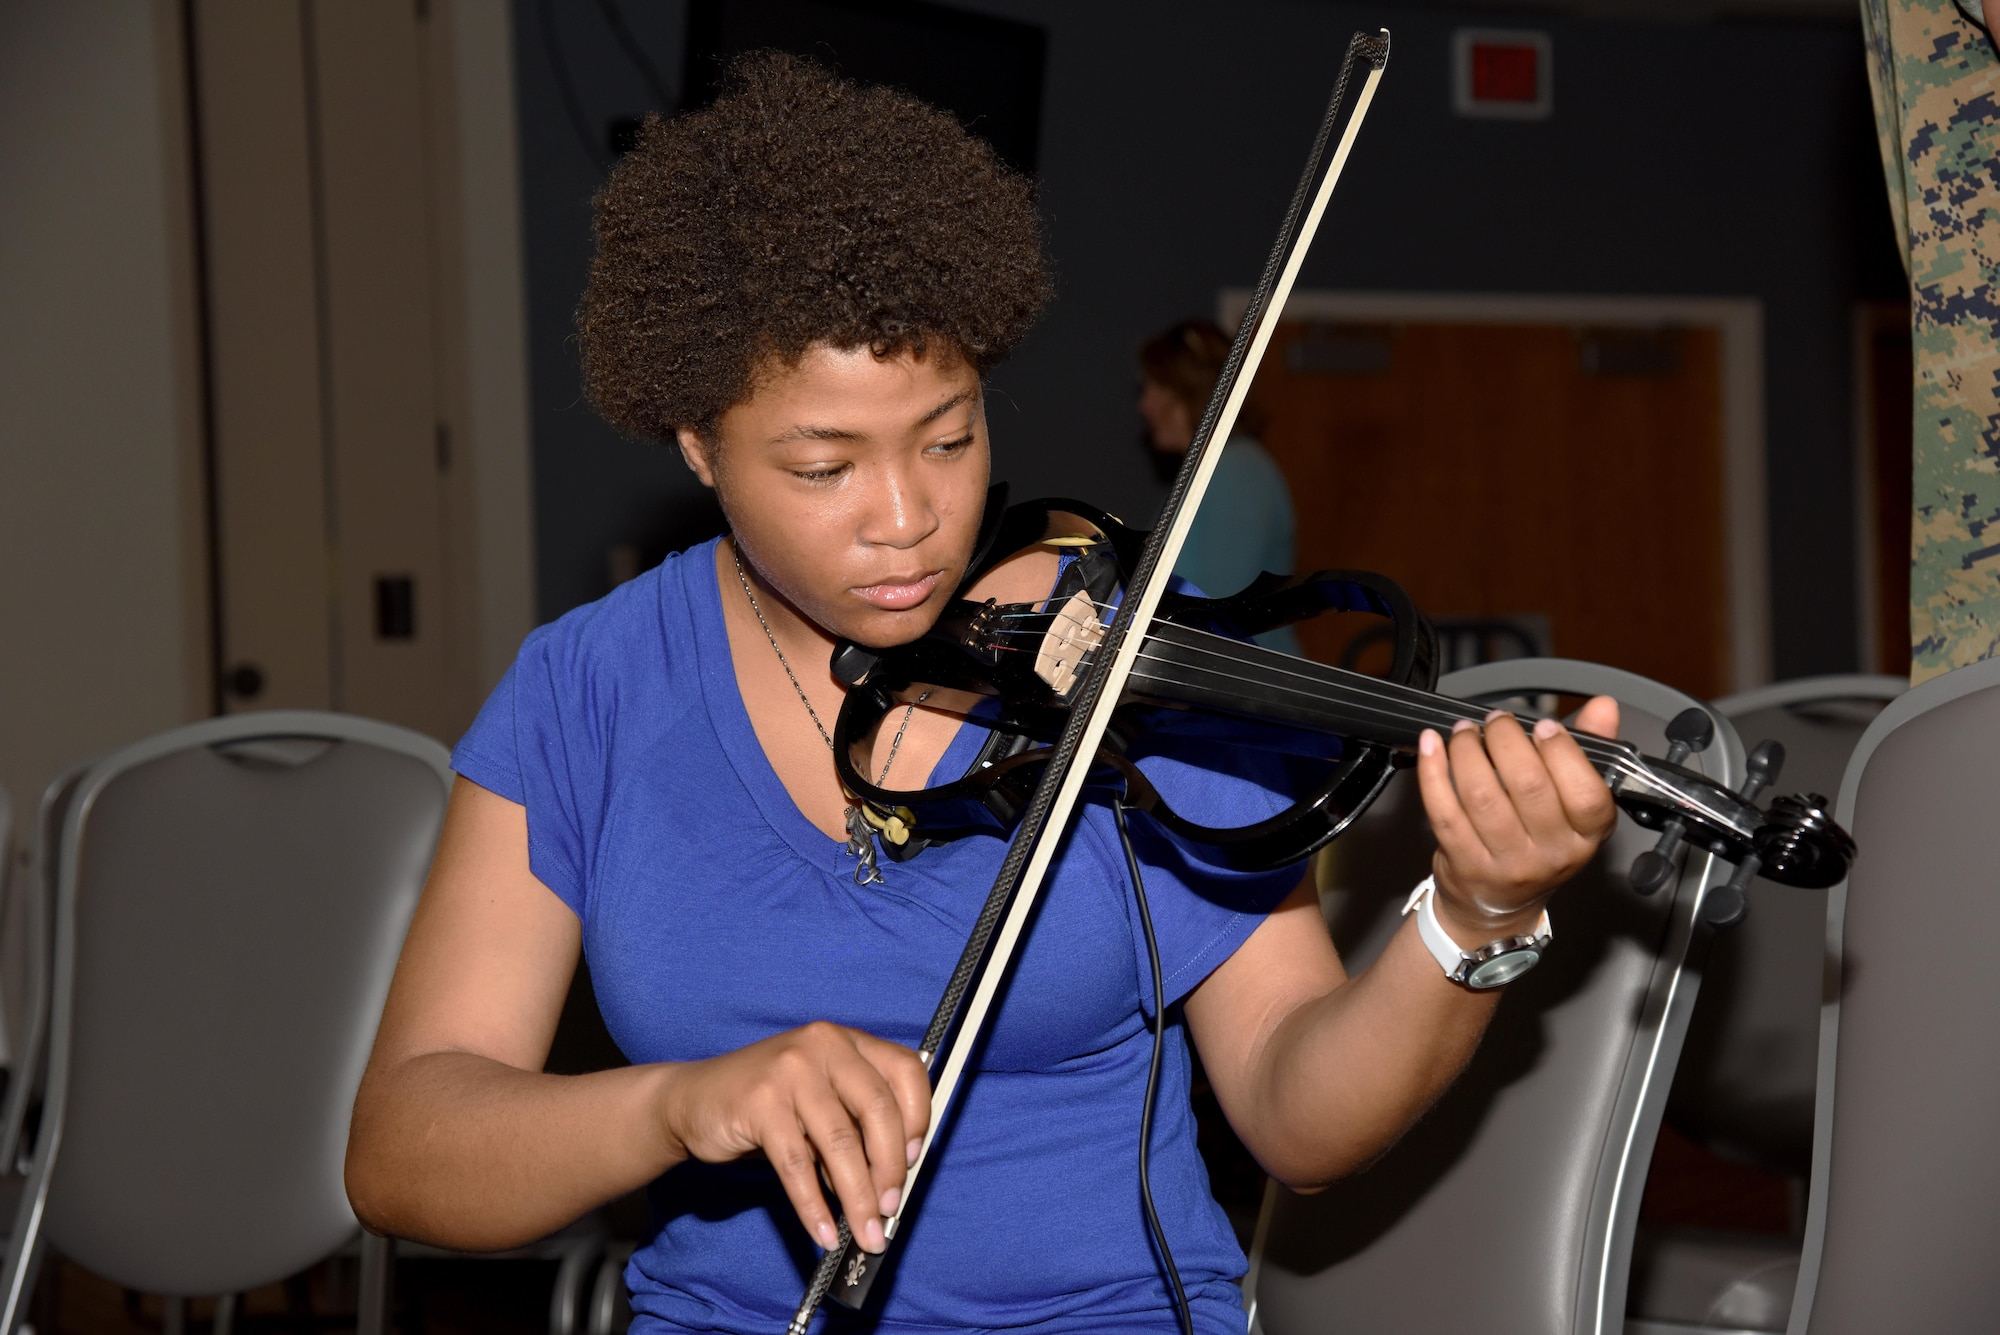 U.S. Air Force Airman 1st Class Lenay Tyler, 315th Training Squadron student, plays an electric violin during a warm-up session before Goodfellow’s Got Talent at the event center on Goodfellow Air Force Base, Texas, March 24, 2017. The talent show featured 10 acts that included poetry, singing and dancing. (U.S. Air Force photo by Staff Sgt. Joshua Edwards/Released)